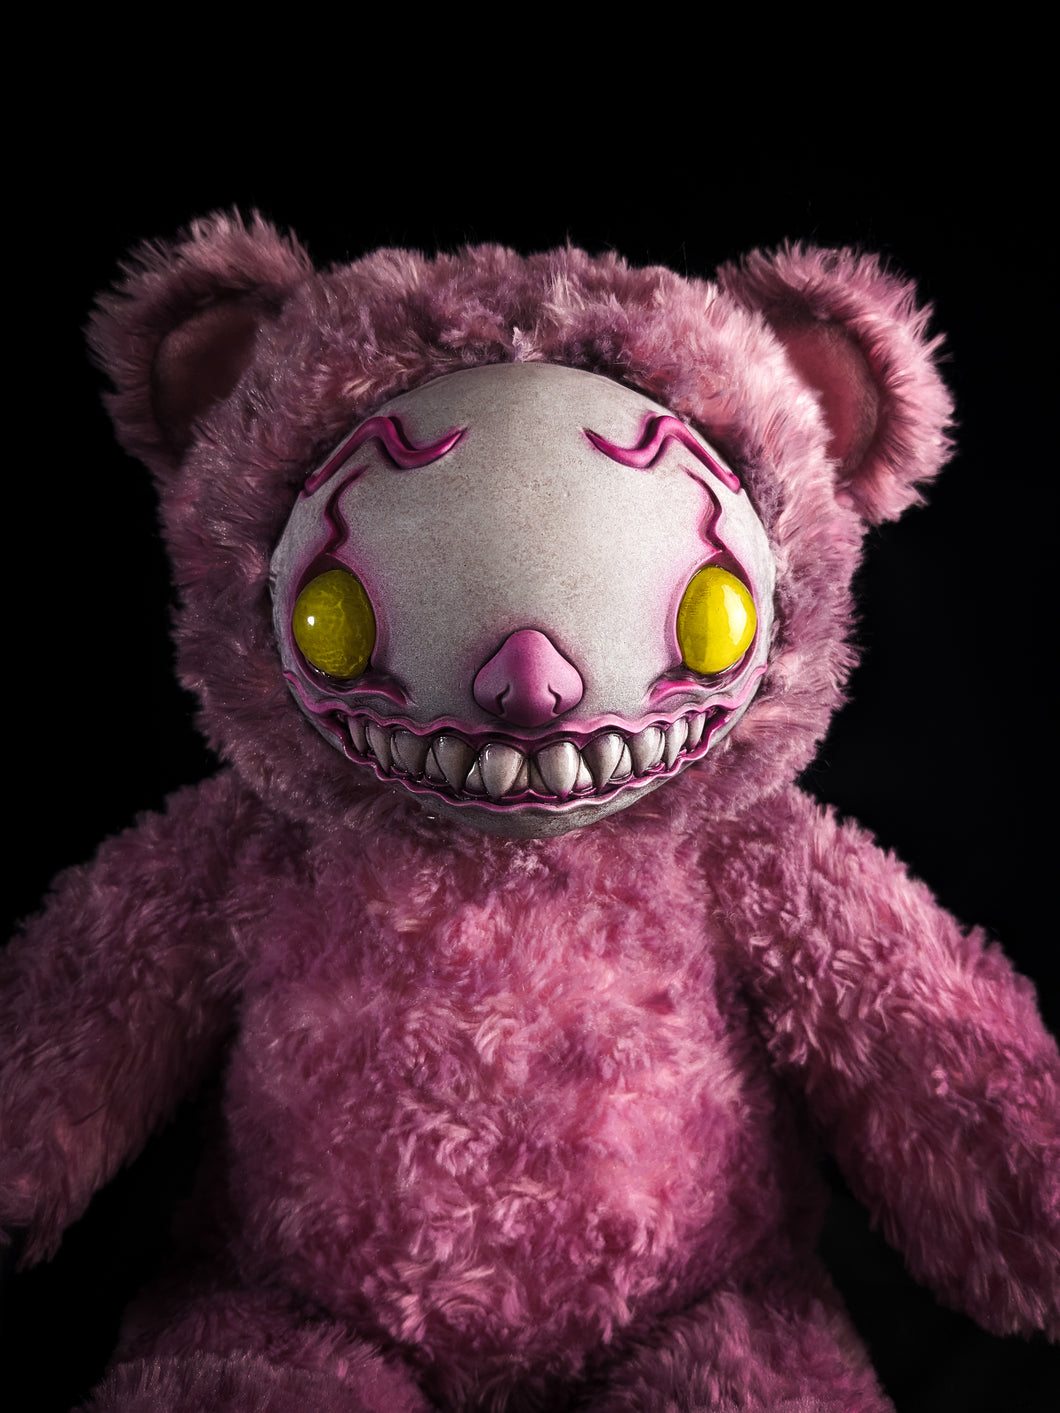 Rottlez (Jagged Jugglez Ver.) - CRYPTCRITS Monster Art Doll Plush Toy